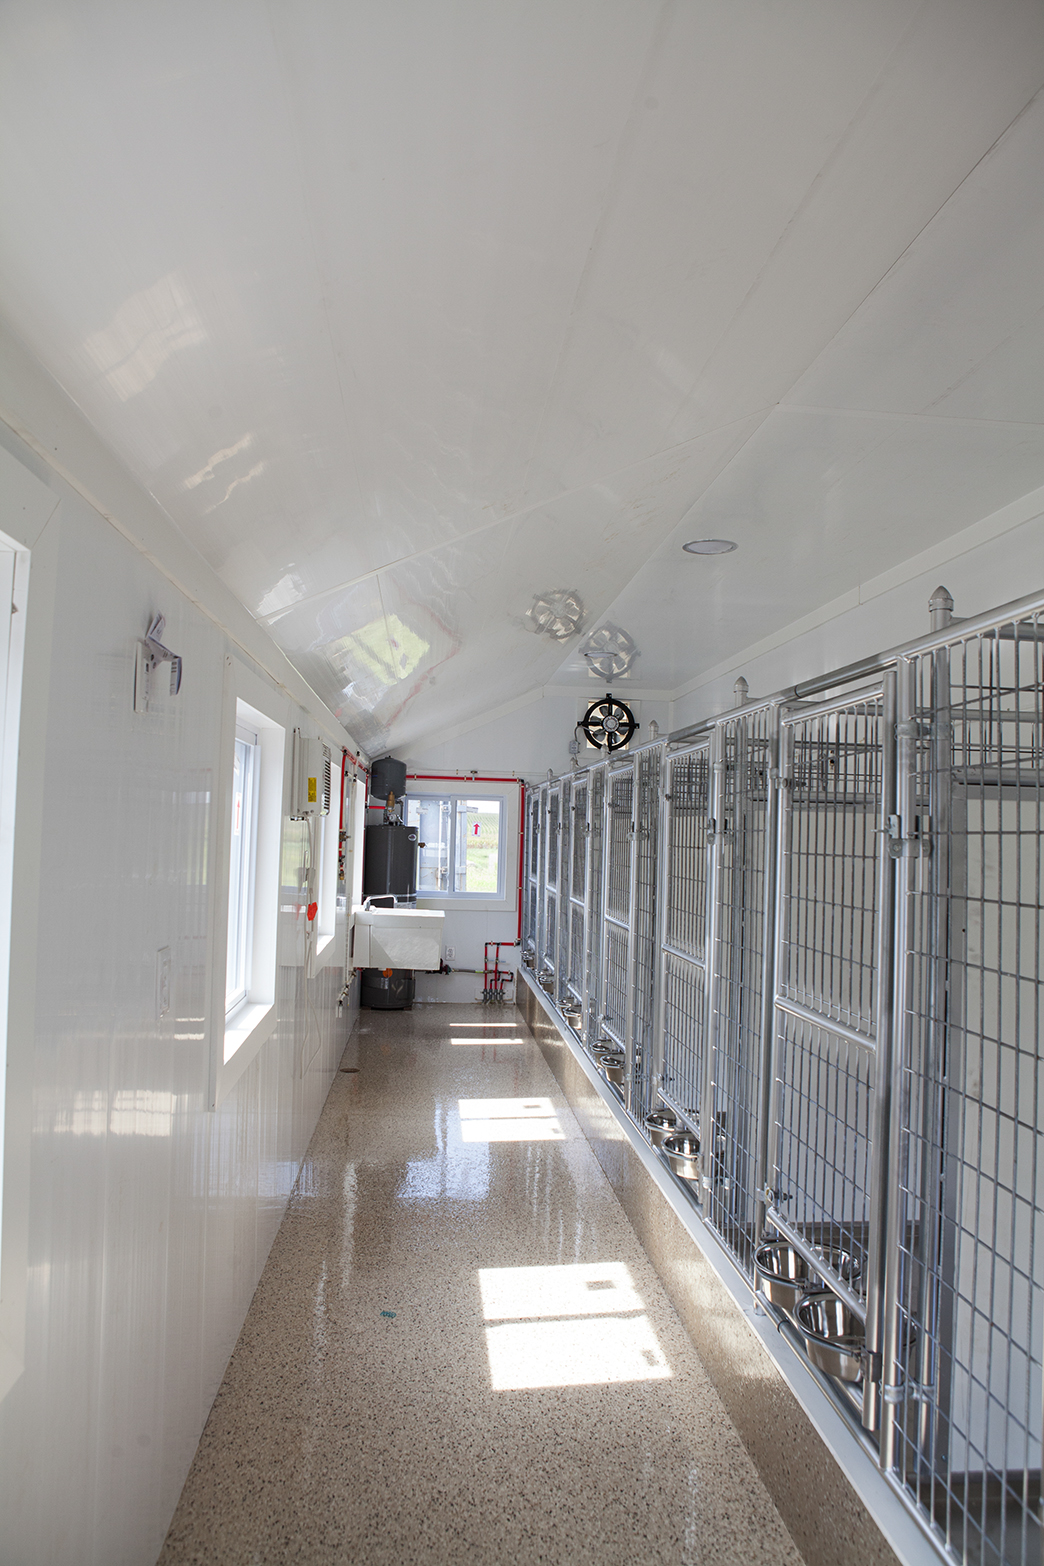 Interior of a 14x32 kennel with 8 boxes